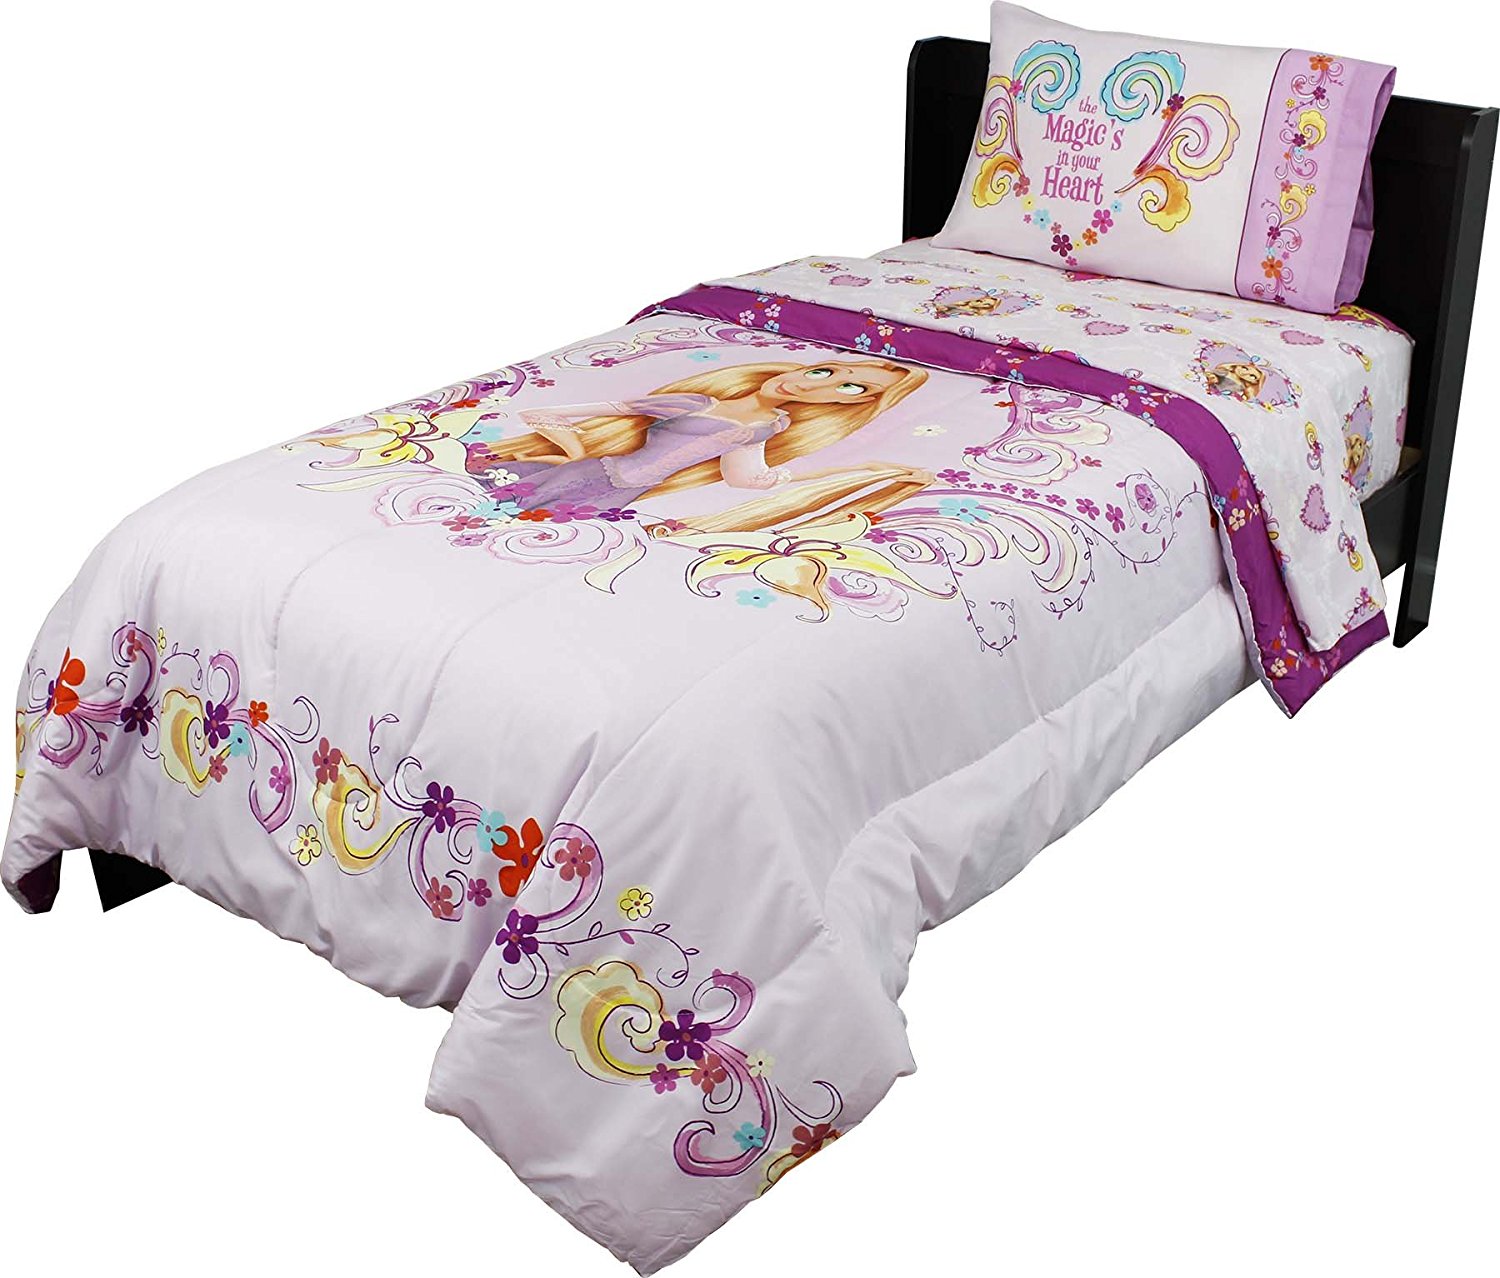 4pc Disney Tangled Twin Bedding Set Rapunzel Magic is in Your Heart Comforter and Sheet Set